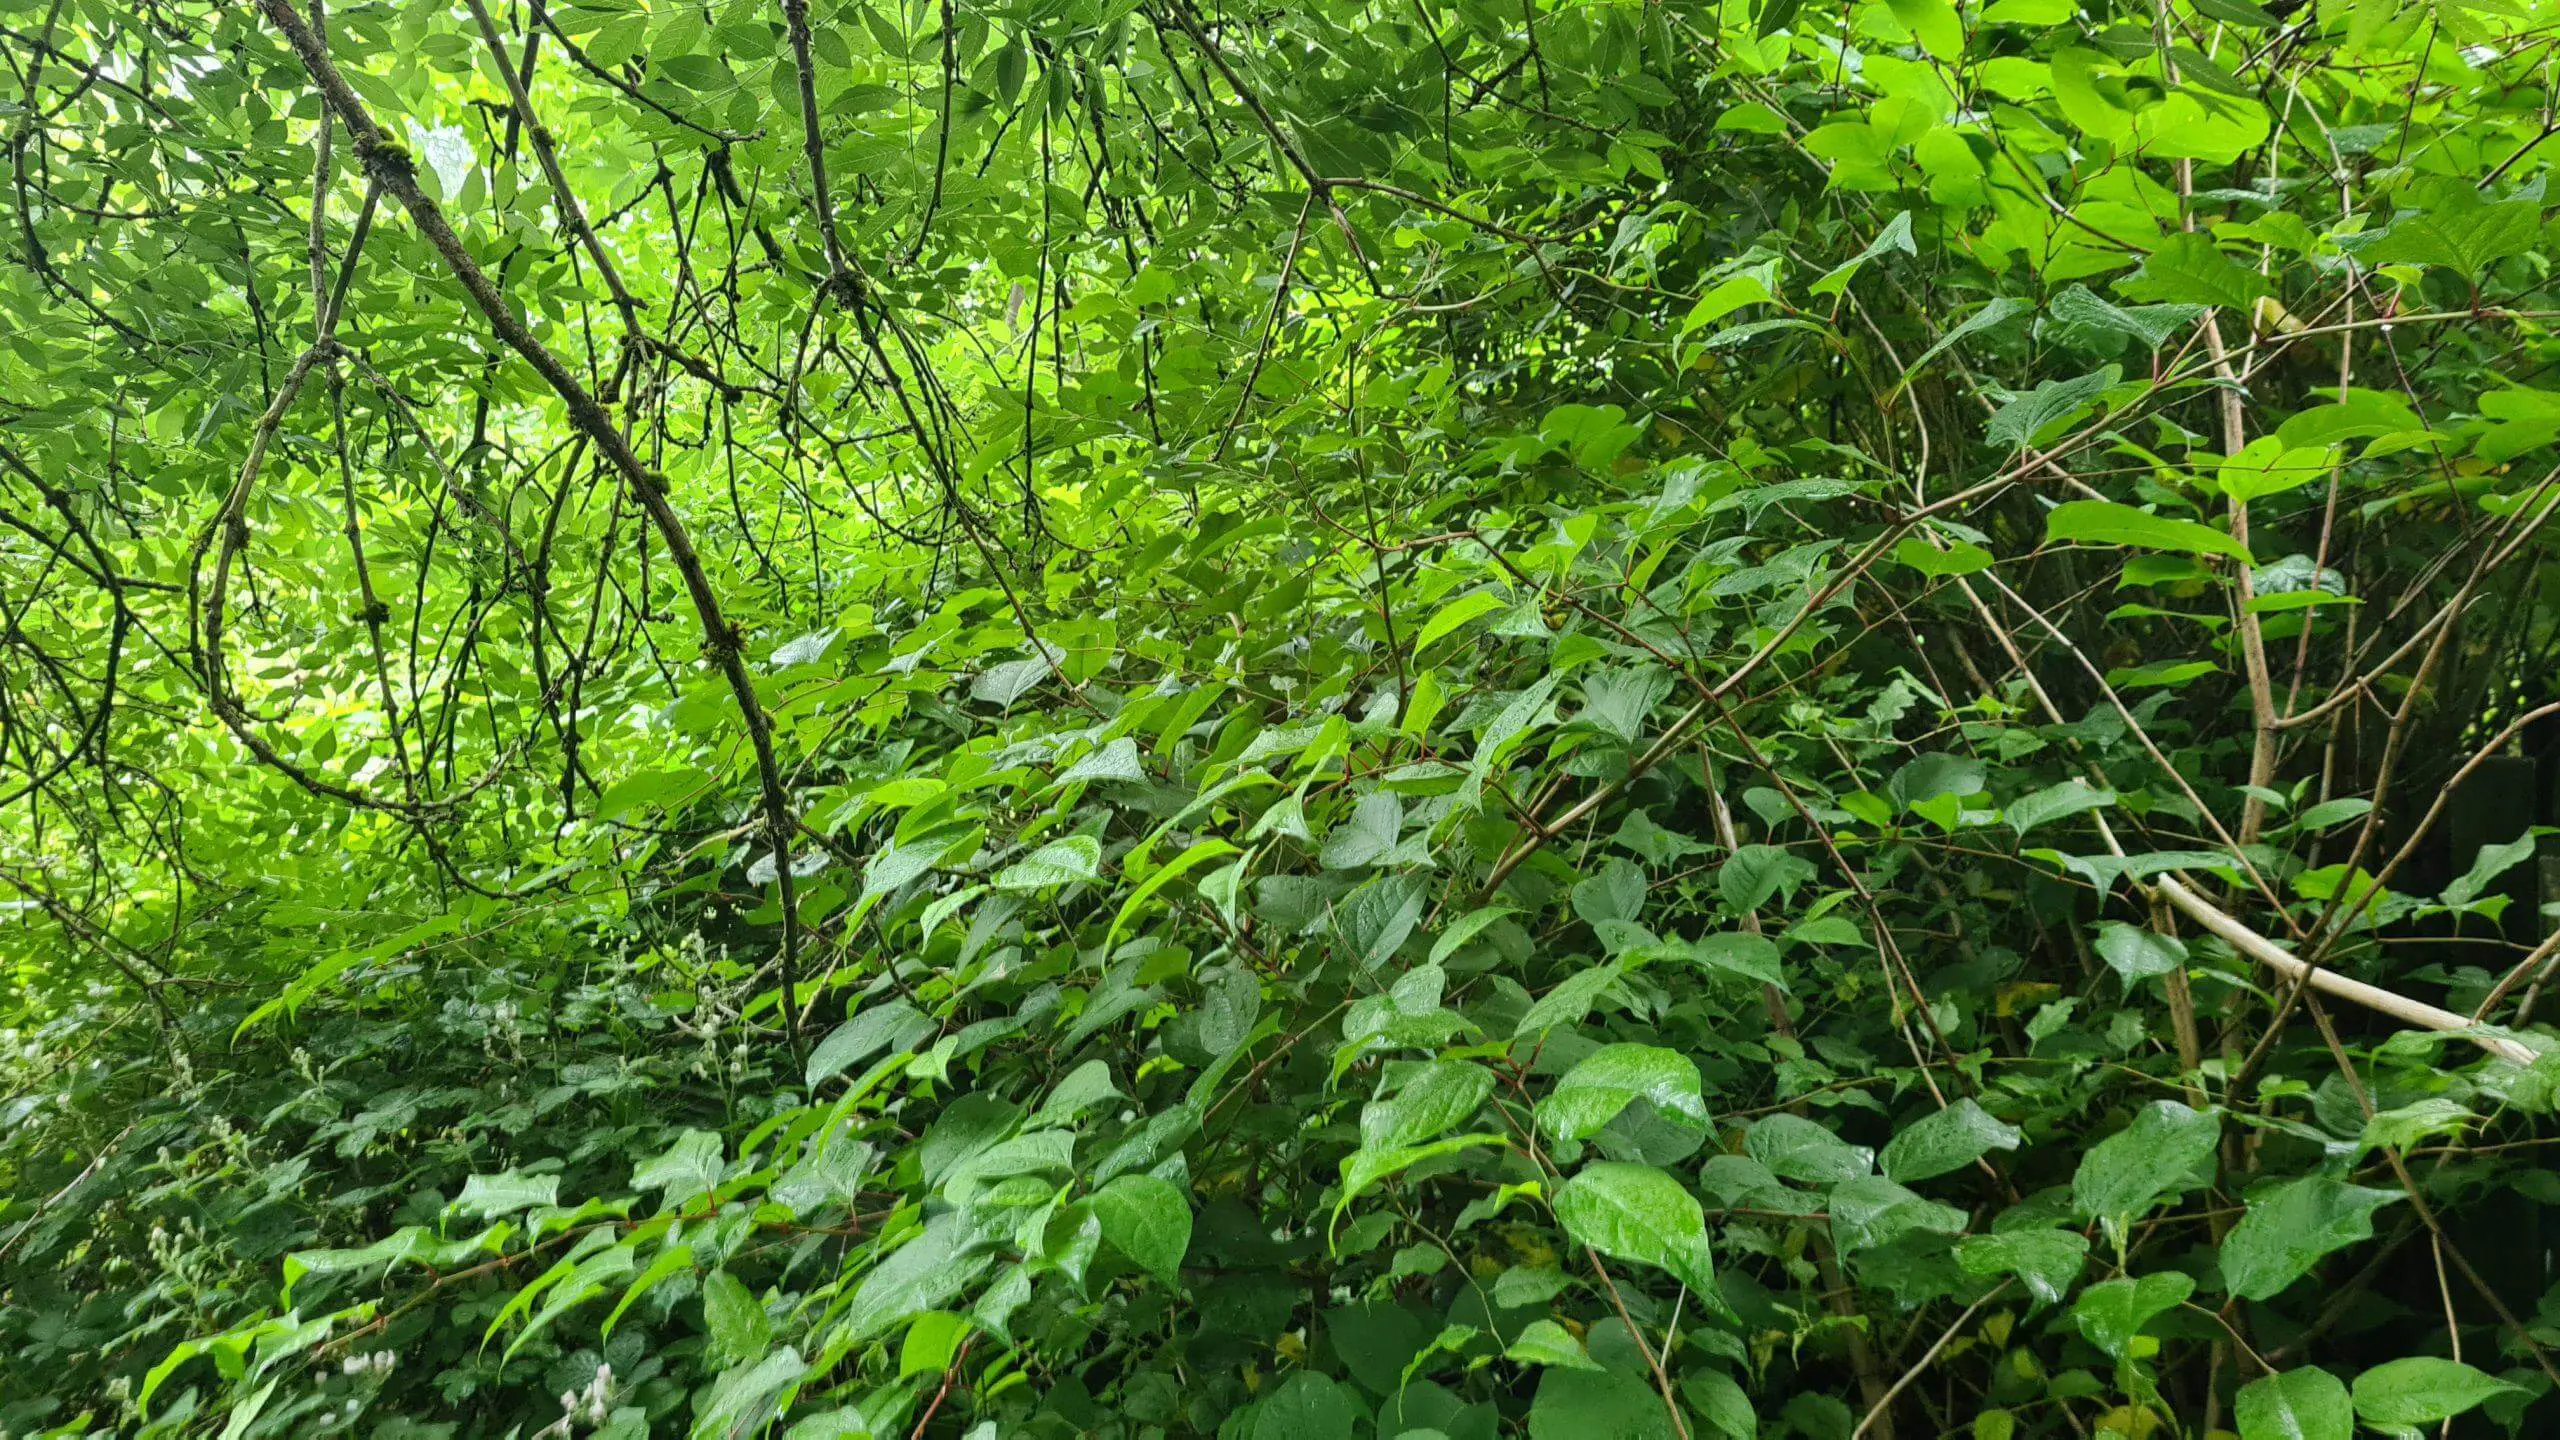 The latest Japanese Knotweed Study confirms how it does not devalue properties